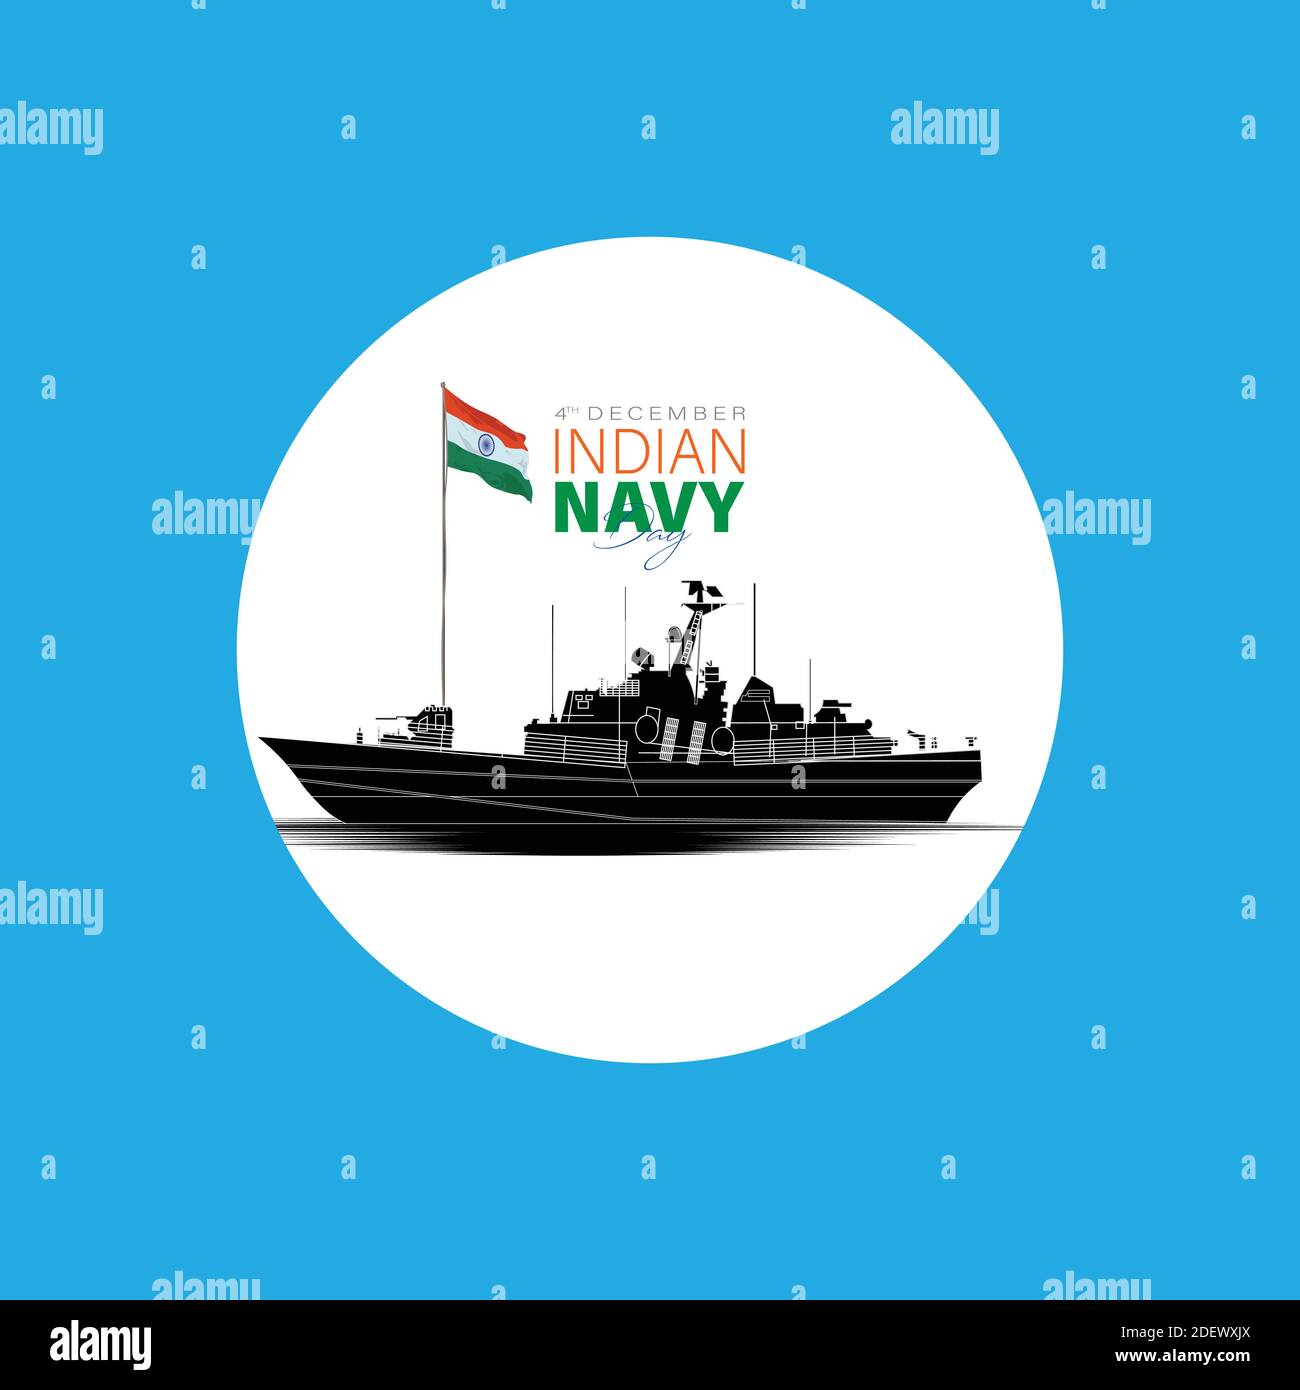 Vector Illustration of Indian Navy Day. December 4. We salute Indian Navy on the occasion of naval day. Stock Vector